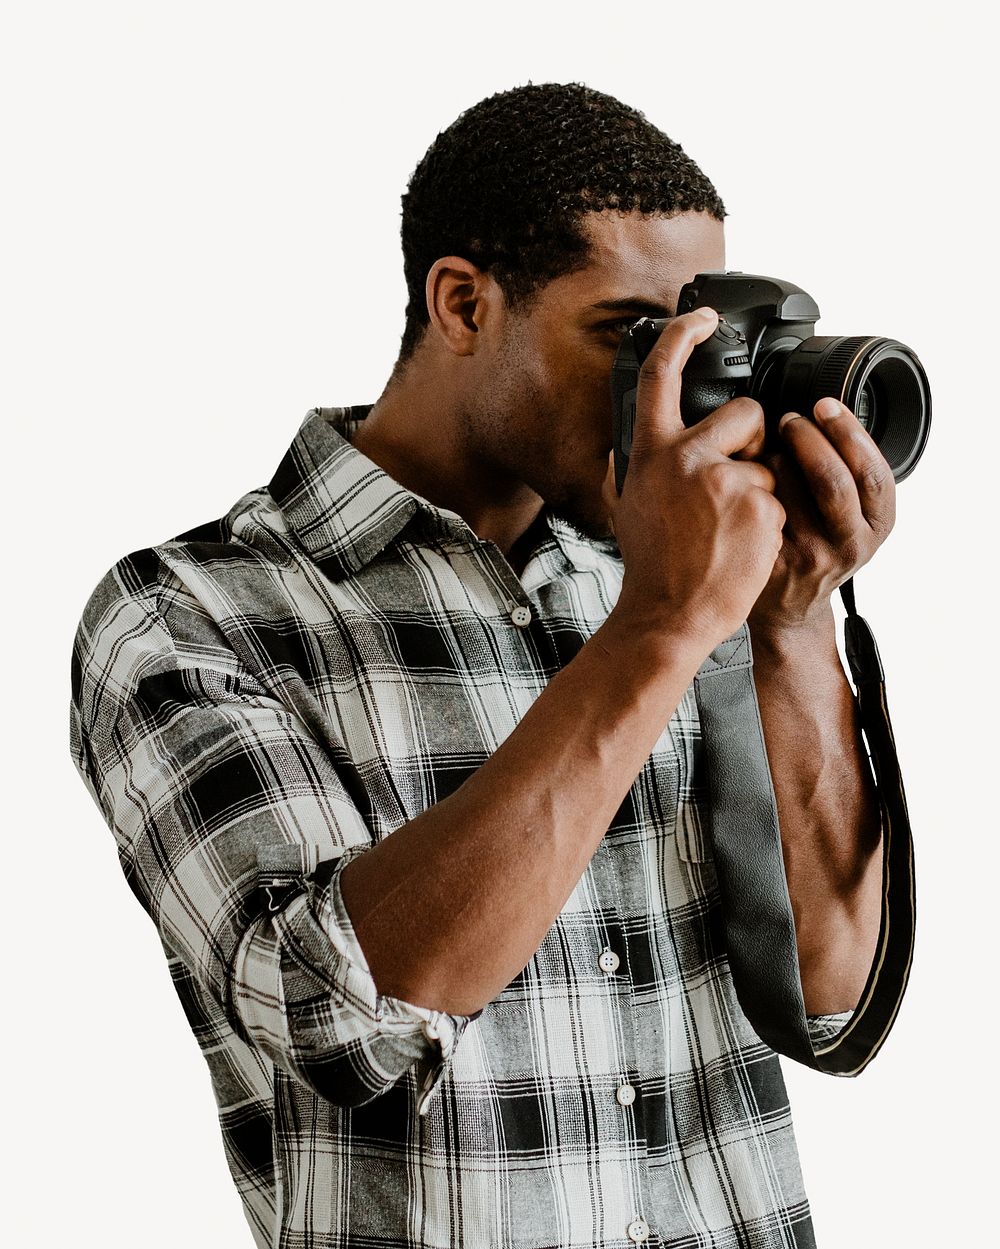 Man photographing with digital camera